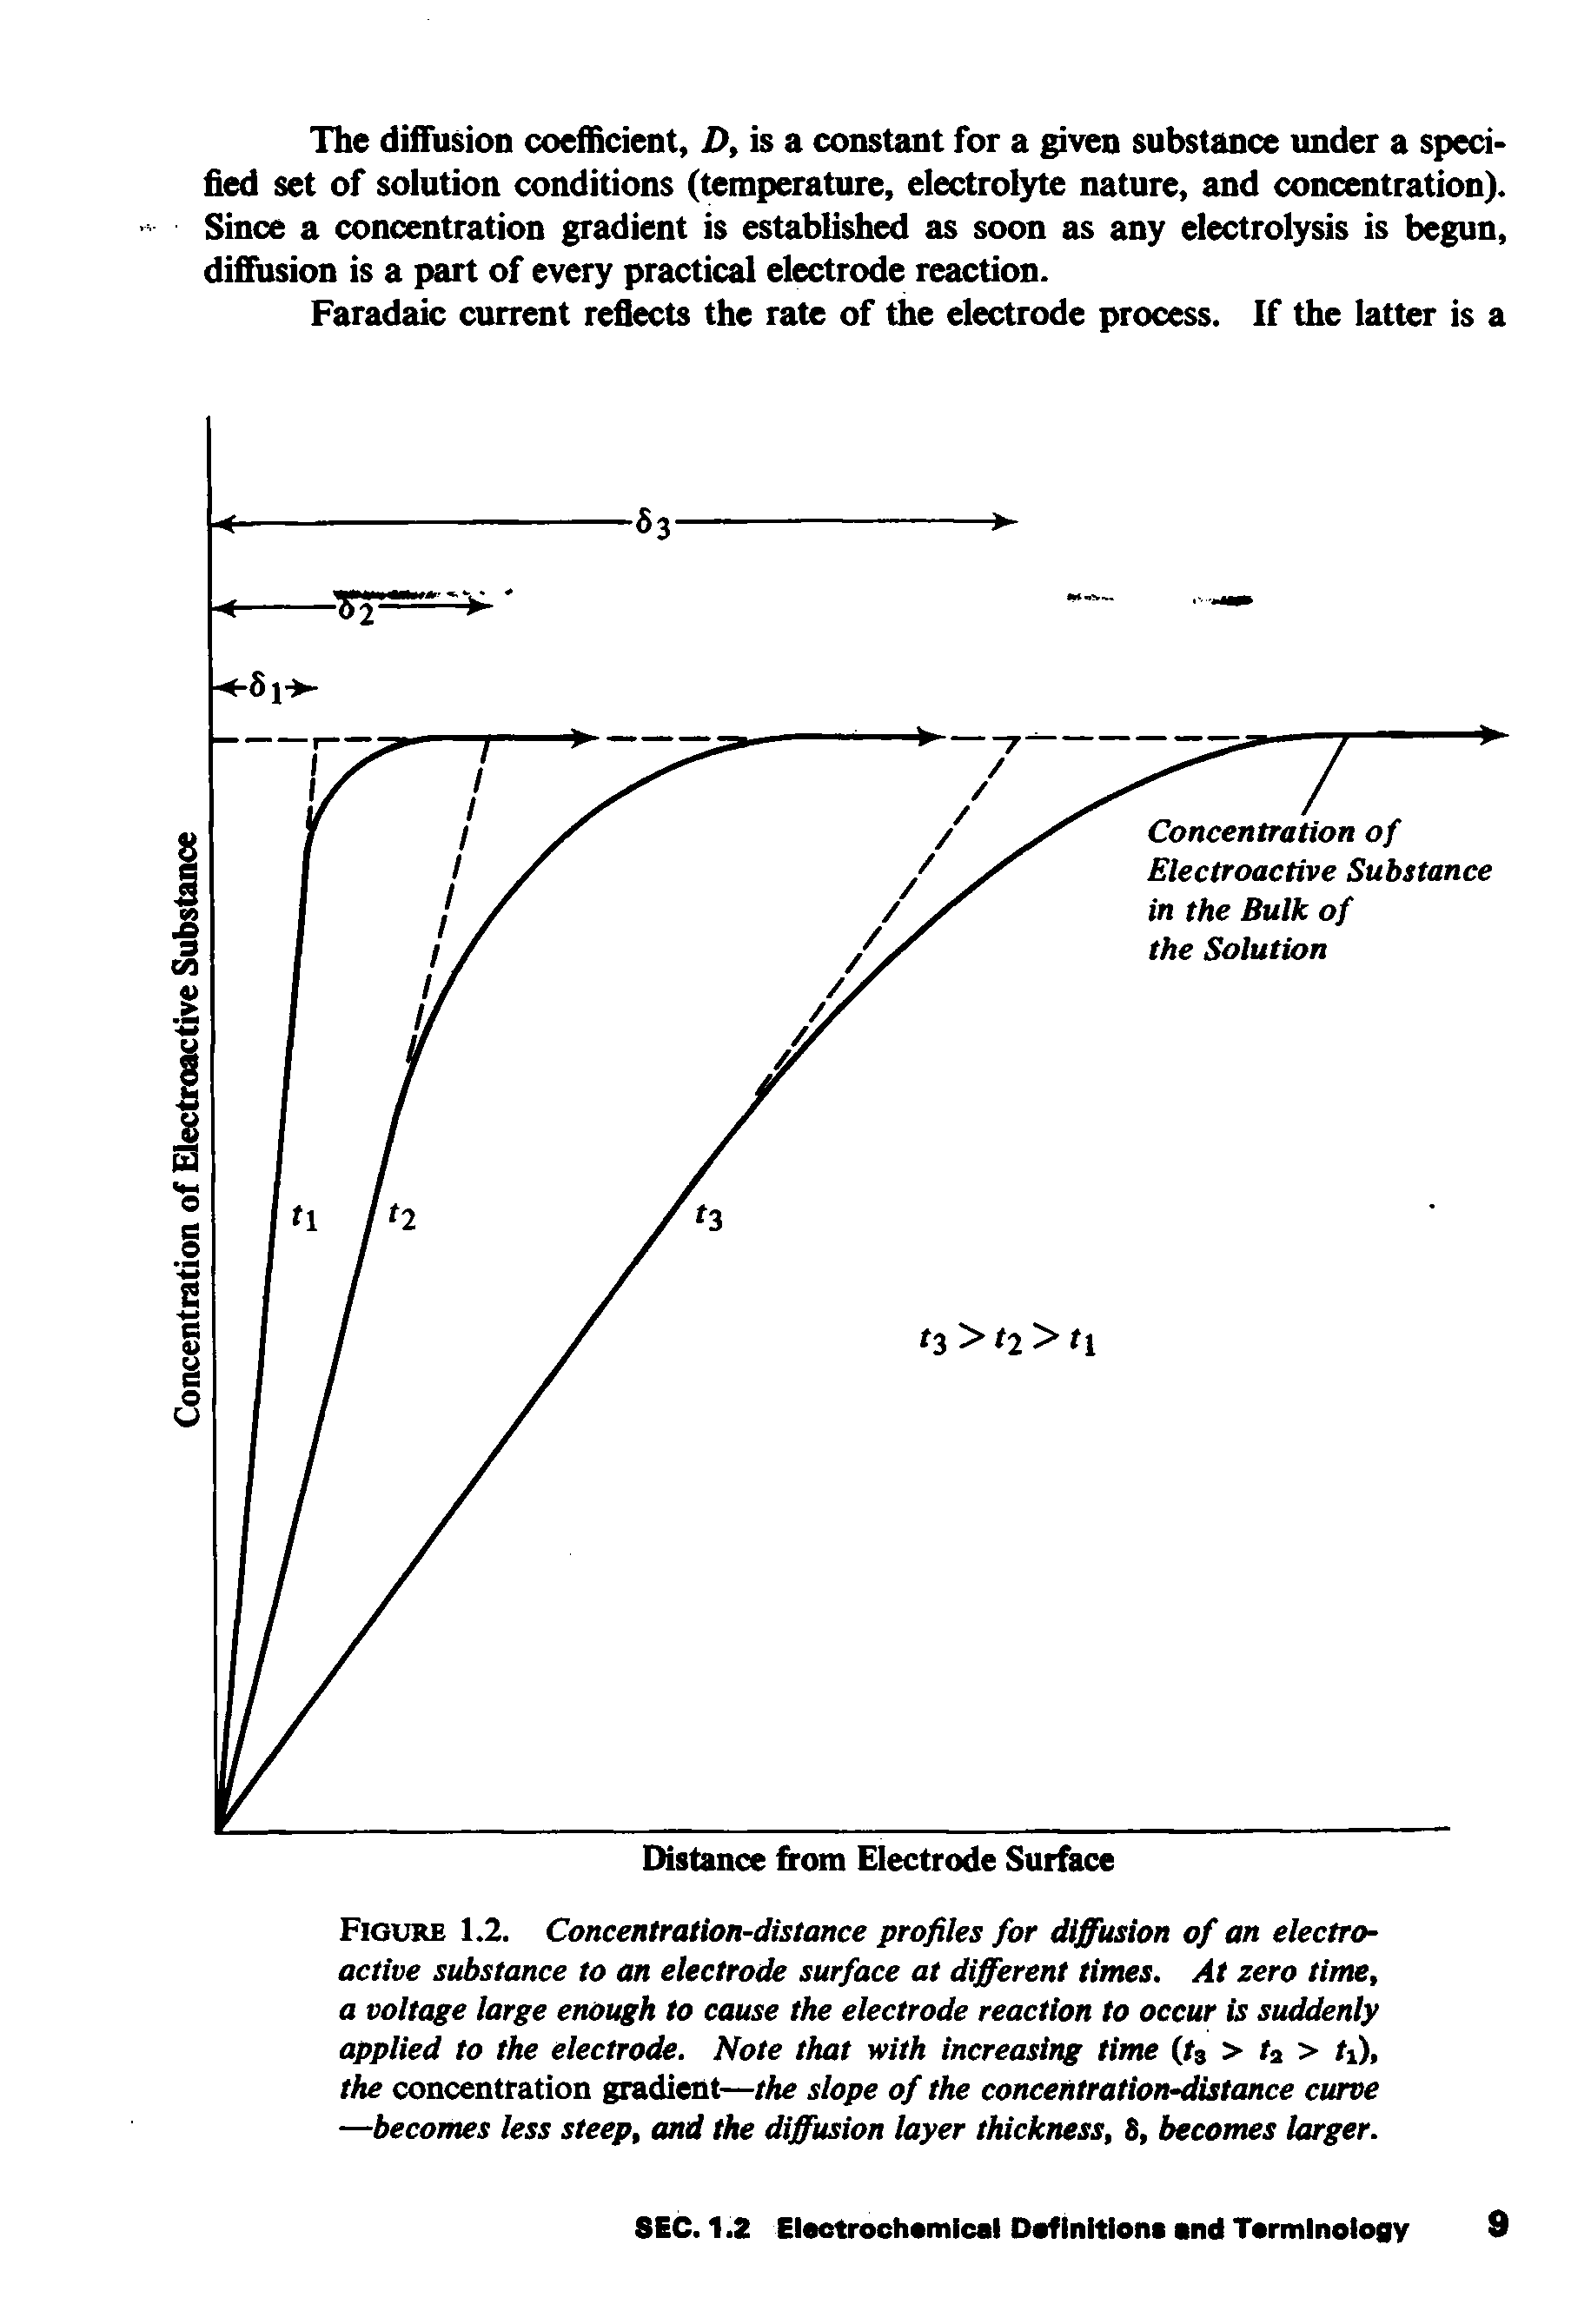 Figure 1.2. Concentration-distance profiles for diffusion of an electroactive substance to an electrode surface at different times. At zero time, a voltage large enough to cause the electrode reaction to occur is suddenly applied to the electrode. Note that with increasing time (tg > ta > ti), the concentration gradient—the slope of the concentration-distance curve —becomes less steep, and the diffusion layer thickness, 8, becomes larger.